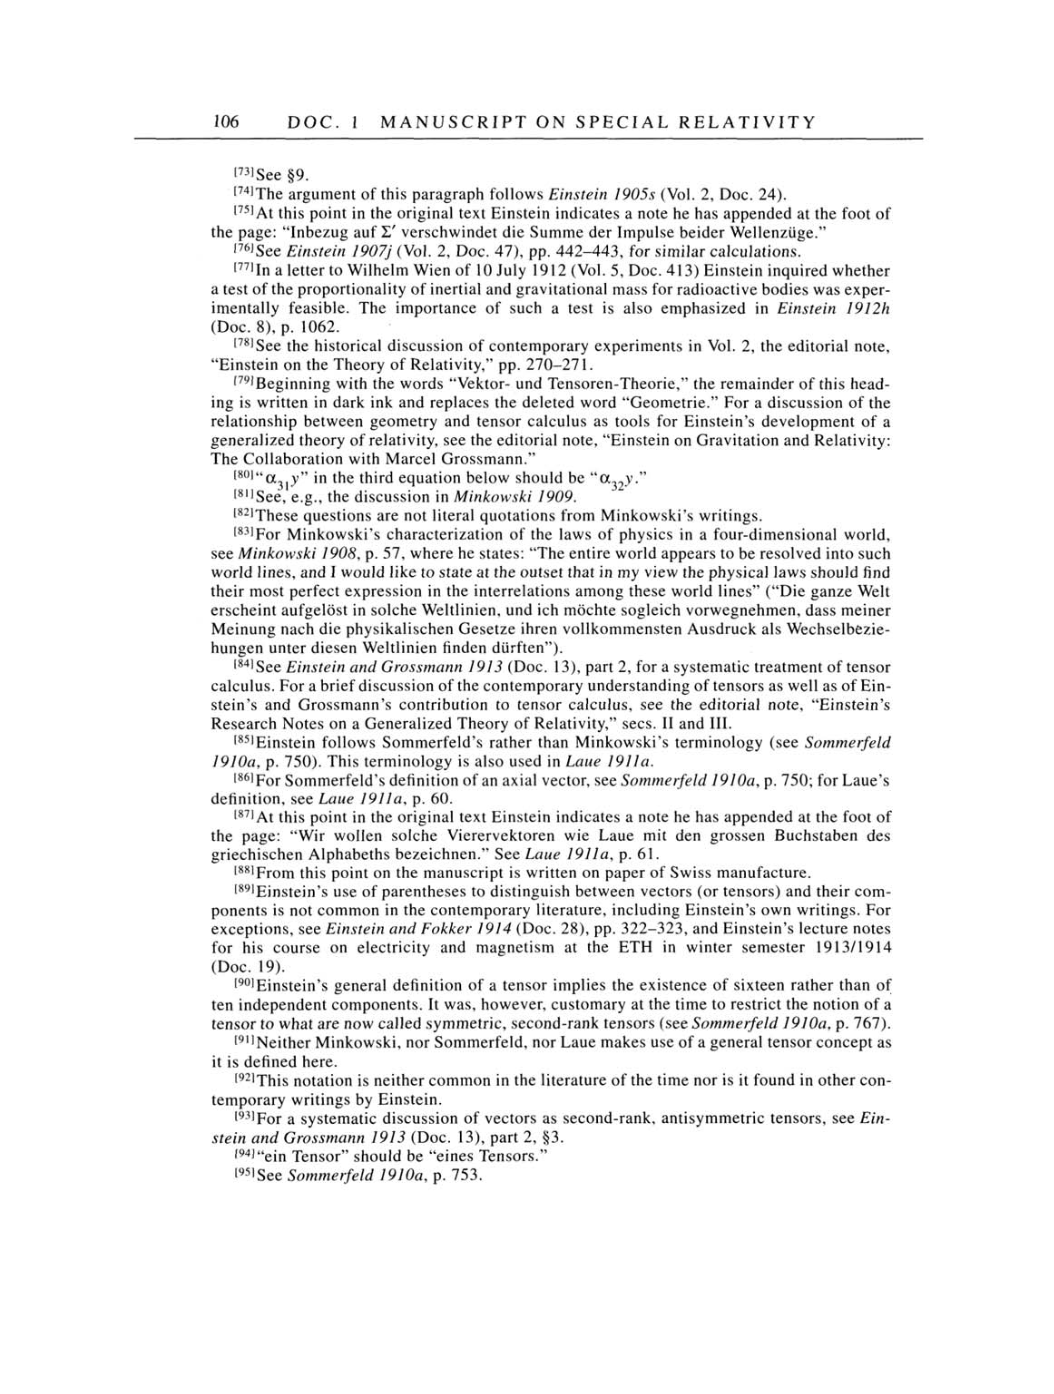 Volume 4: The Swiss Years: Writings 1912-1914 page 106